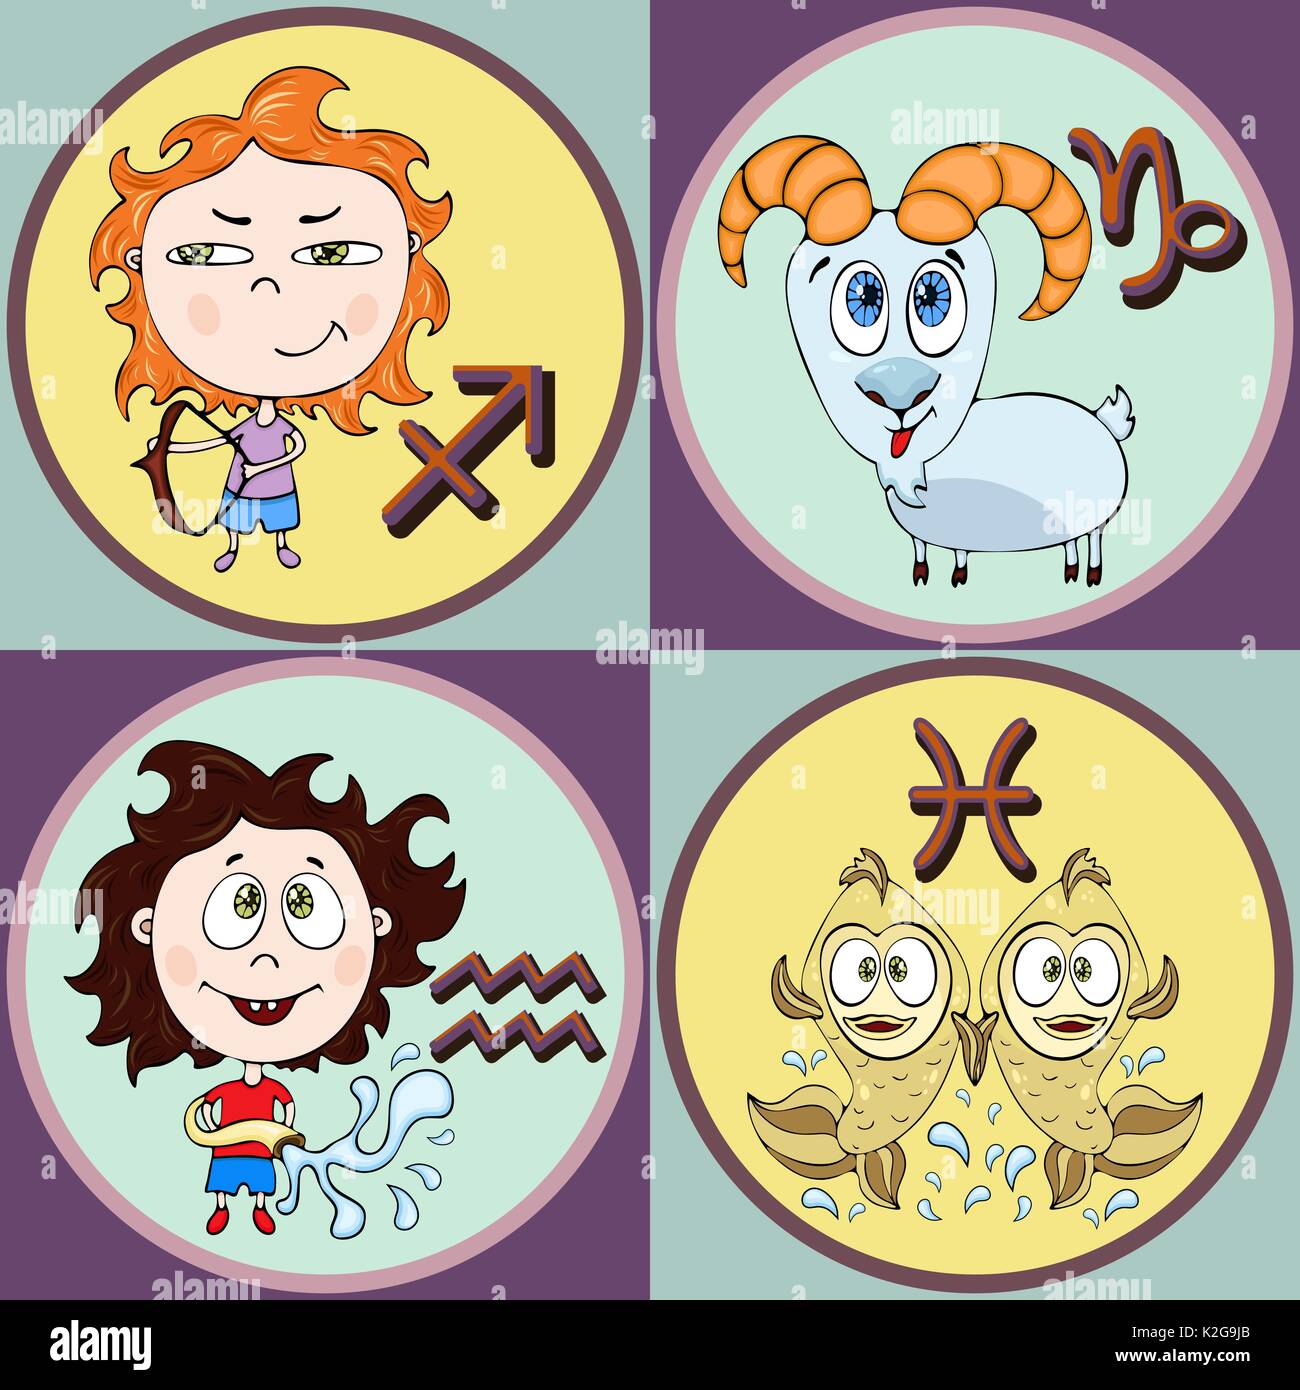 Set zodiac sign cartoon, Sagittarius, Capricorn, Aquarius, Pisces. Painted funny astrological characters and symbols in a round frame multicolored on  Stock Vector